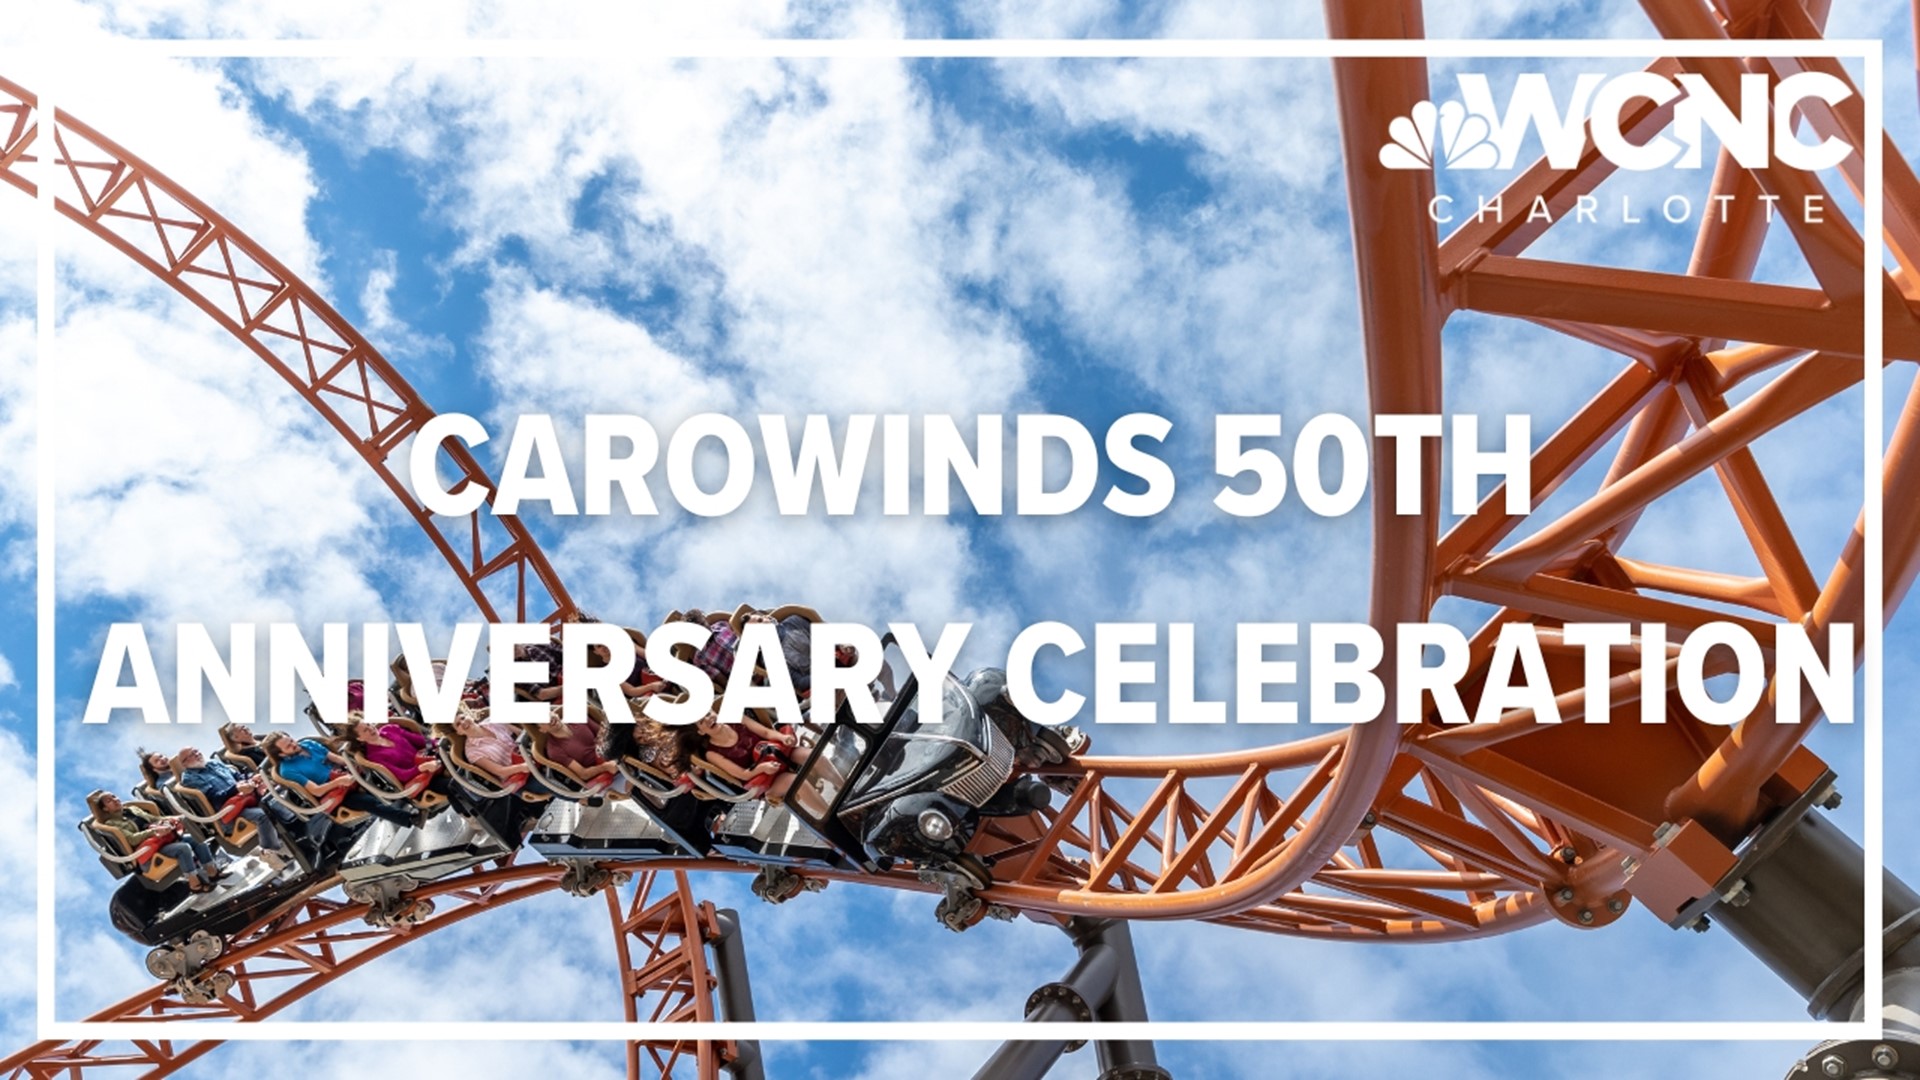 In accordance with the milestone, Carowinds announced its new Aeronautica Landing area will open for the first time in April 2023.